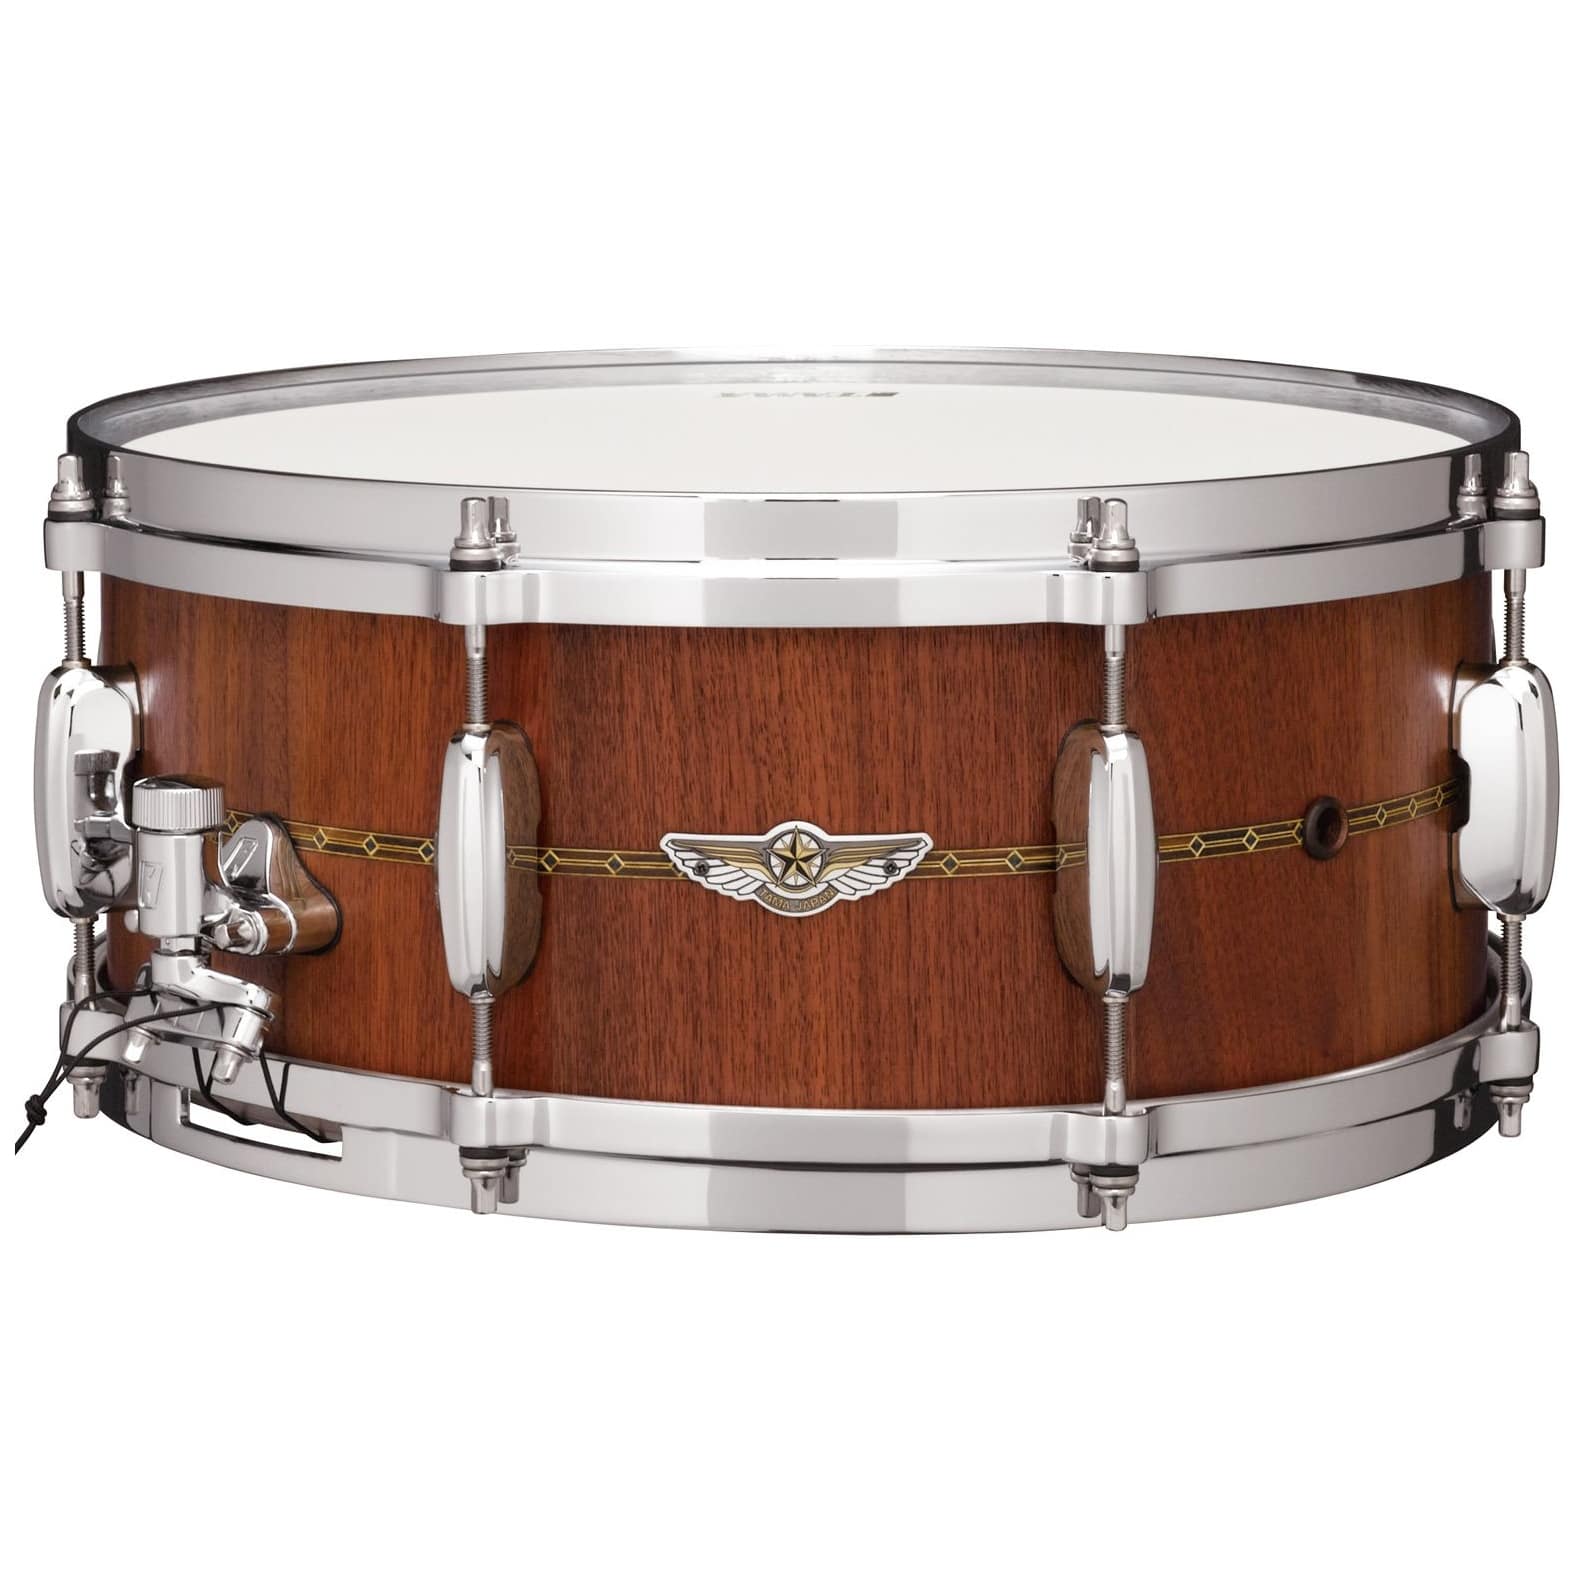 Tama TVW146S-OWN STAR Snaredrum - Oiled Natural Walnut  14" x 6"